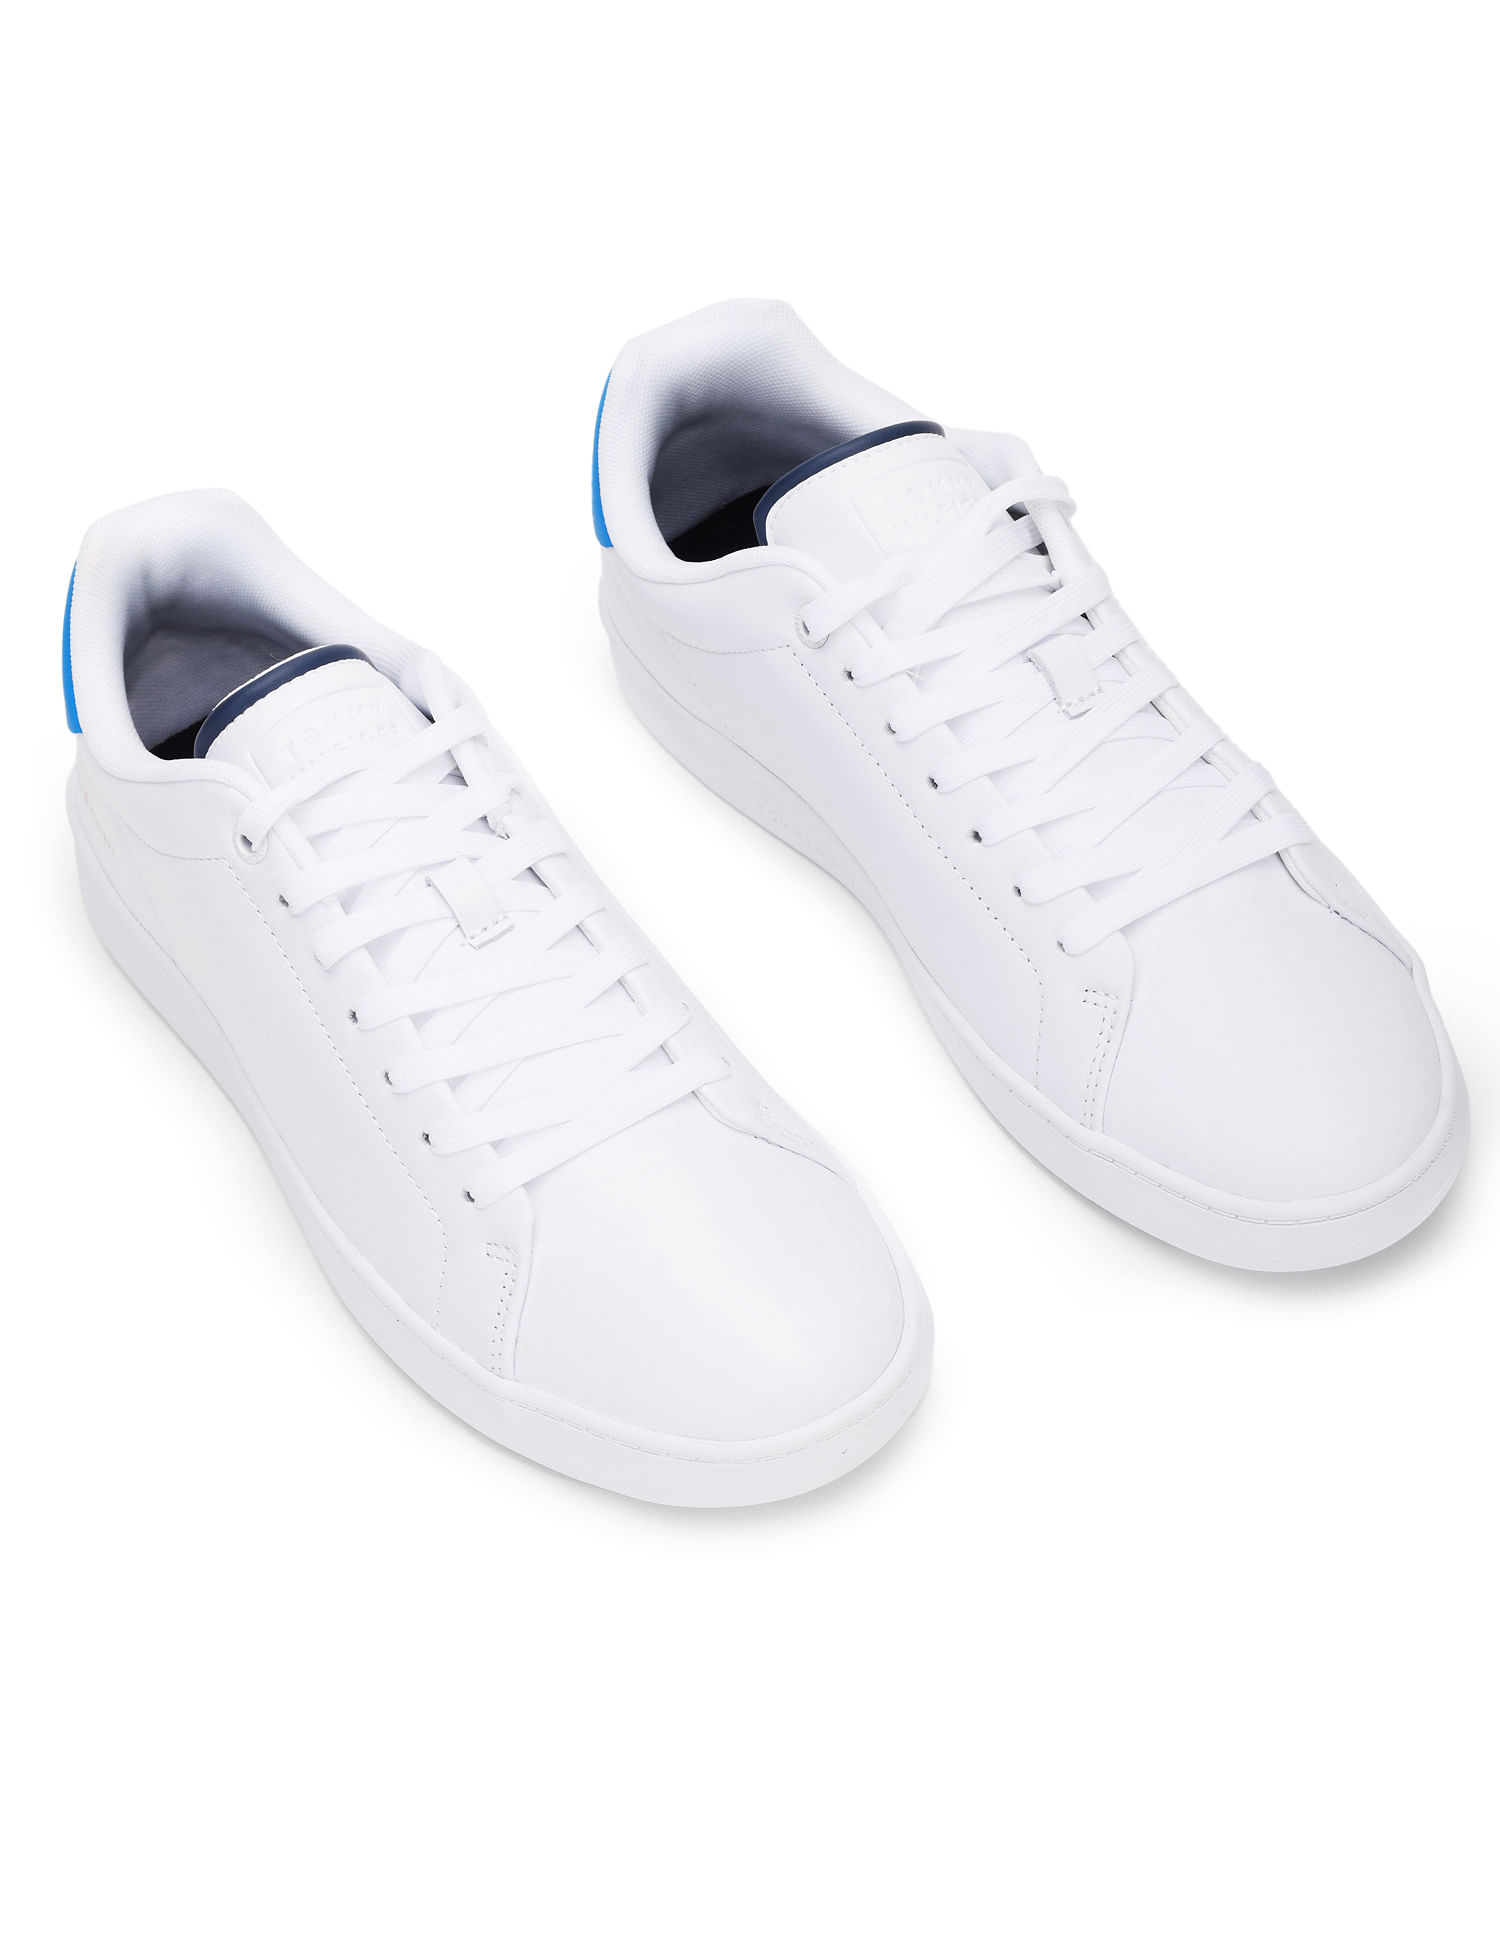 Buy Nike Men White COURT ROYALE AC Sneakers - Casual Shoes for Men 9797975  | Myntra